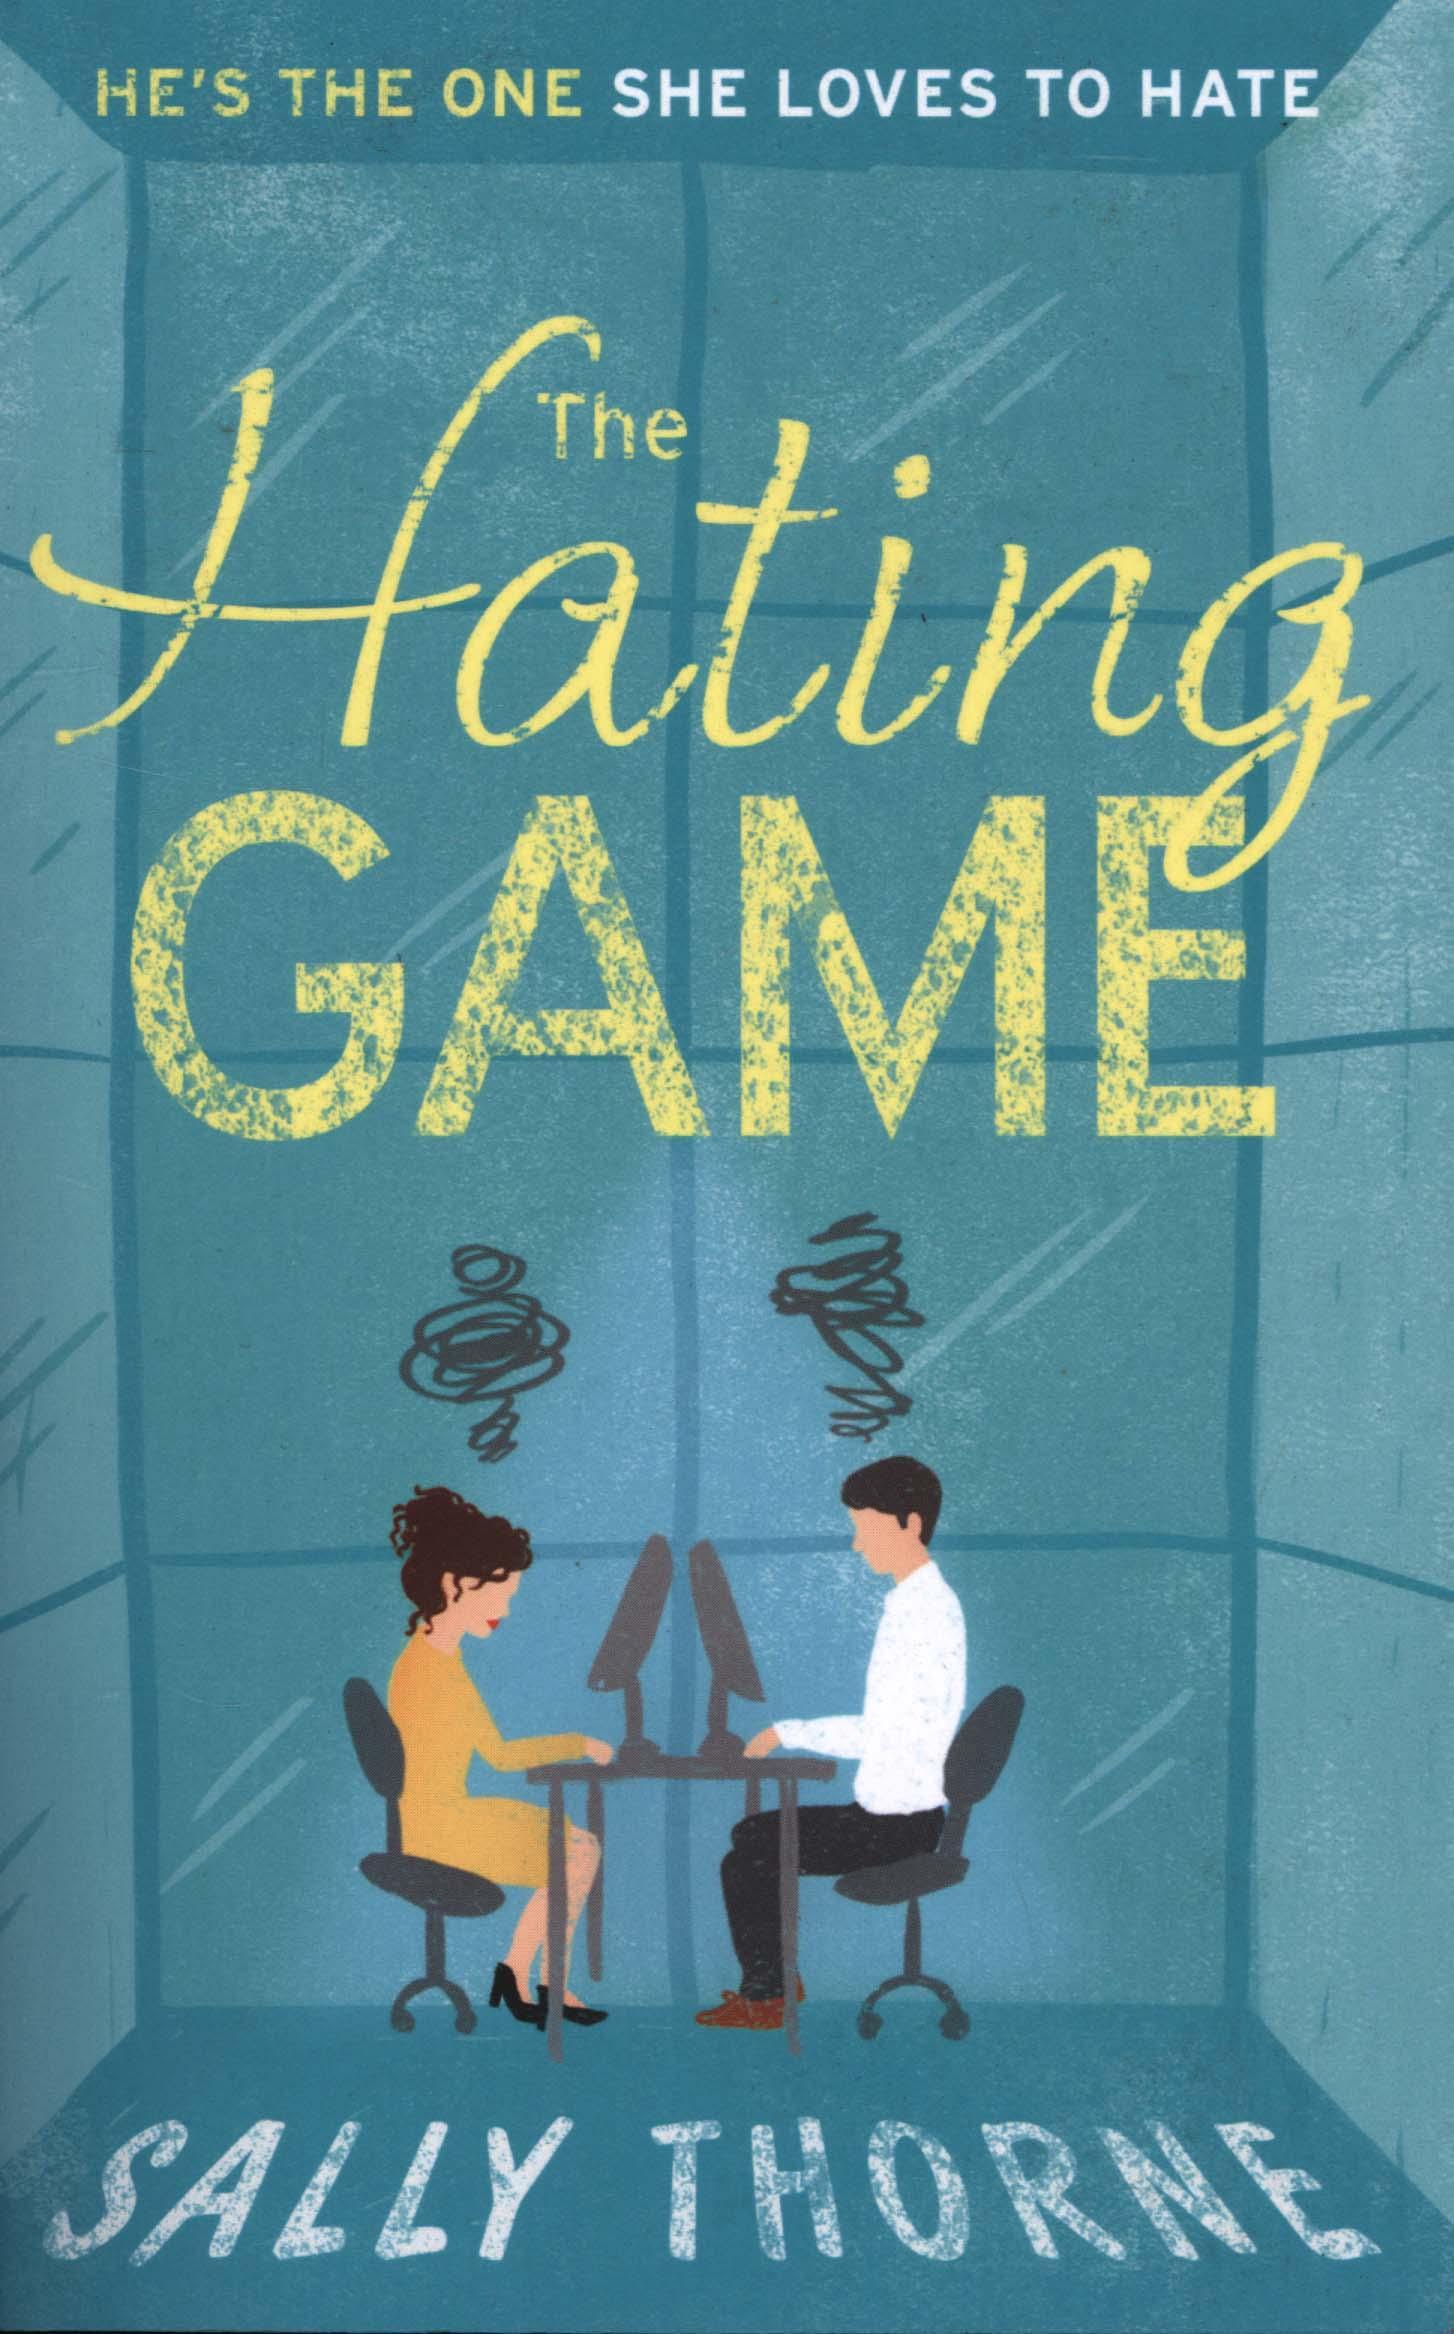 Hating Game: the funniest romcom you'll read this year